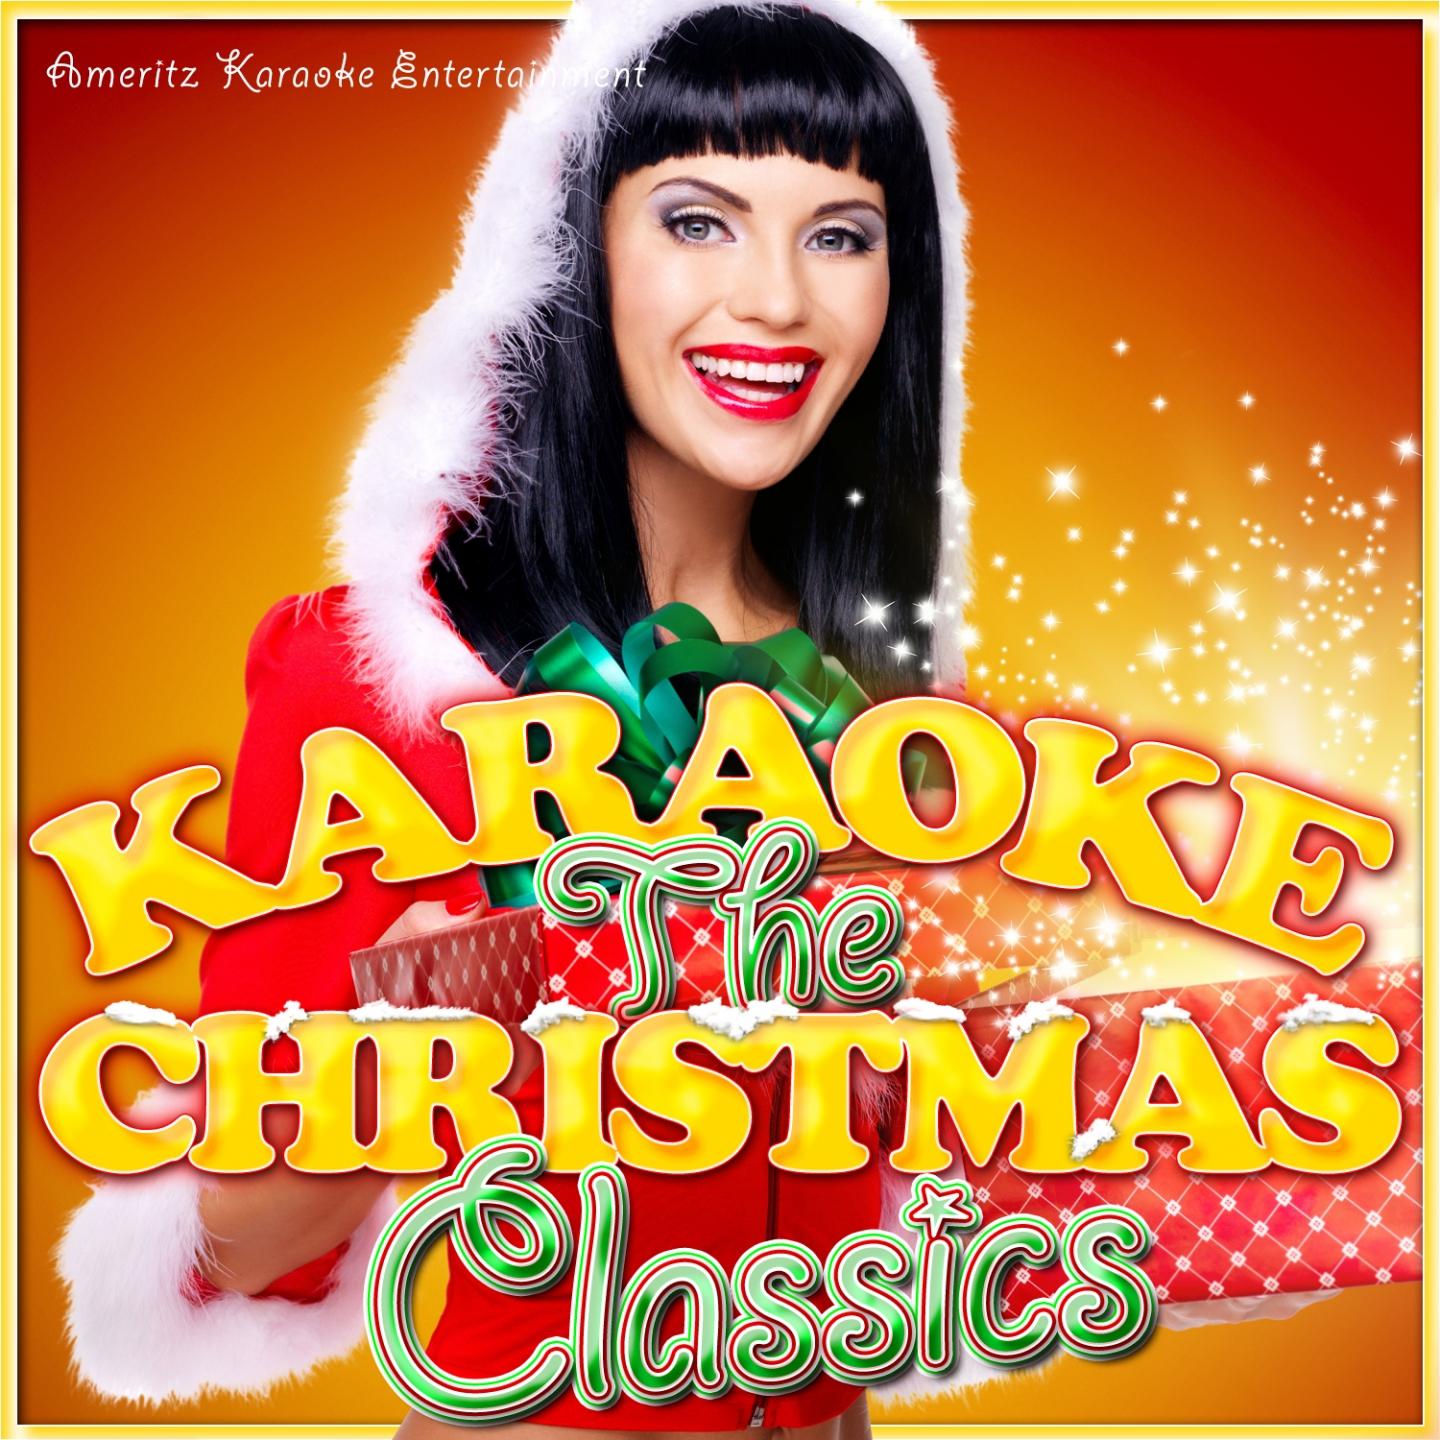 It Just Don't Feel Like Xmas (Without You) [Karaoke Version] [Originally Performed By Rihanna]